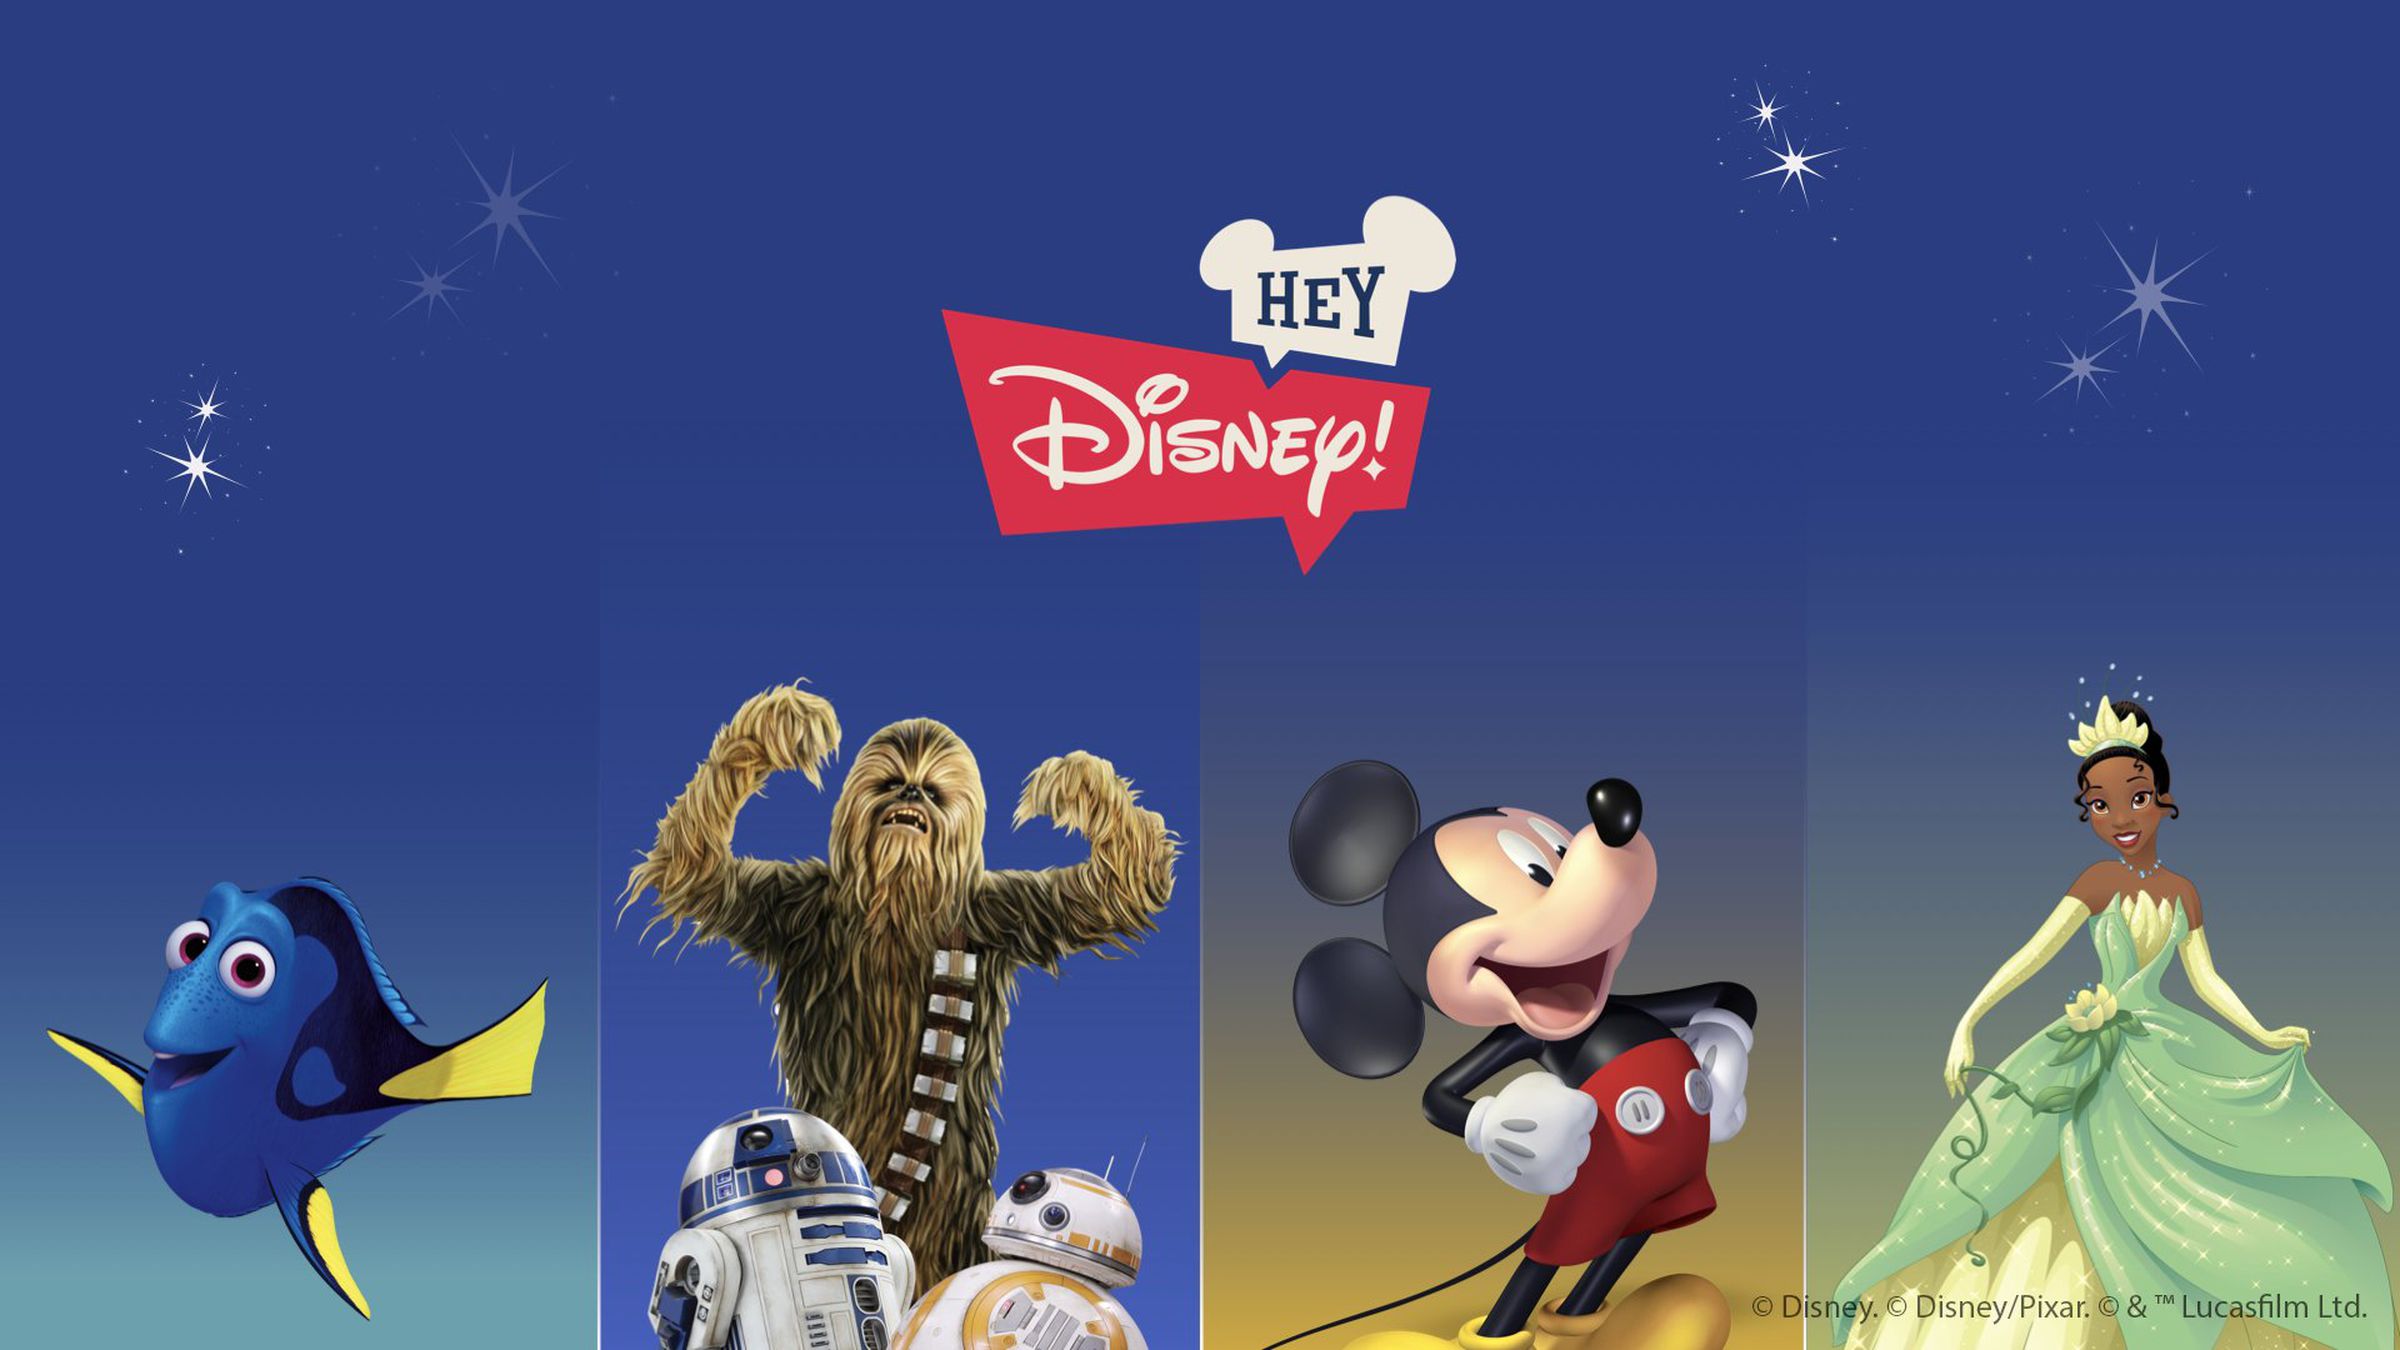 The Hey Disney command will be available on Echo devices.